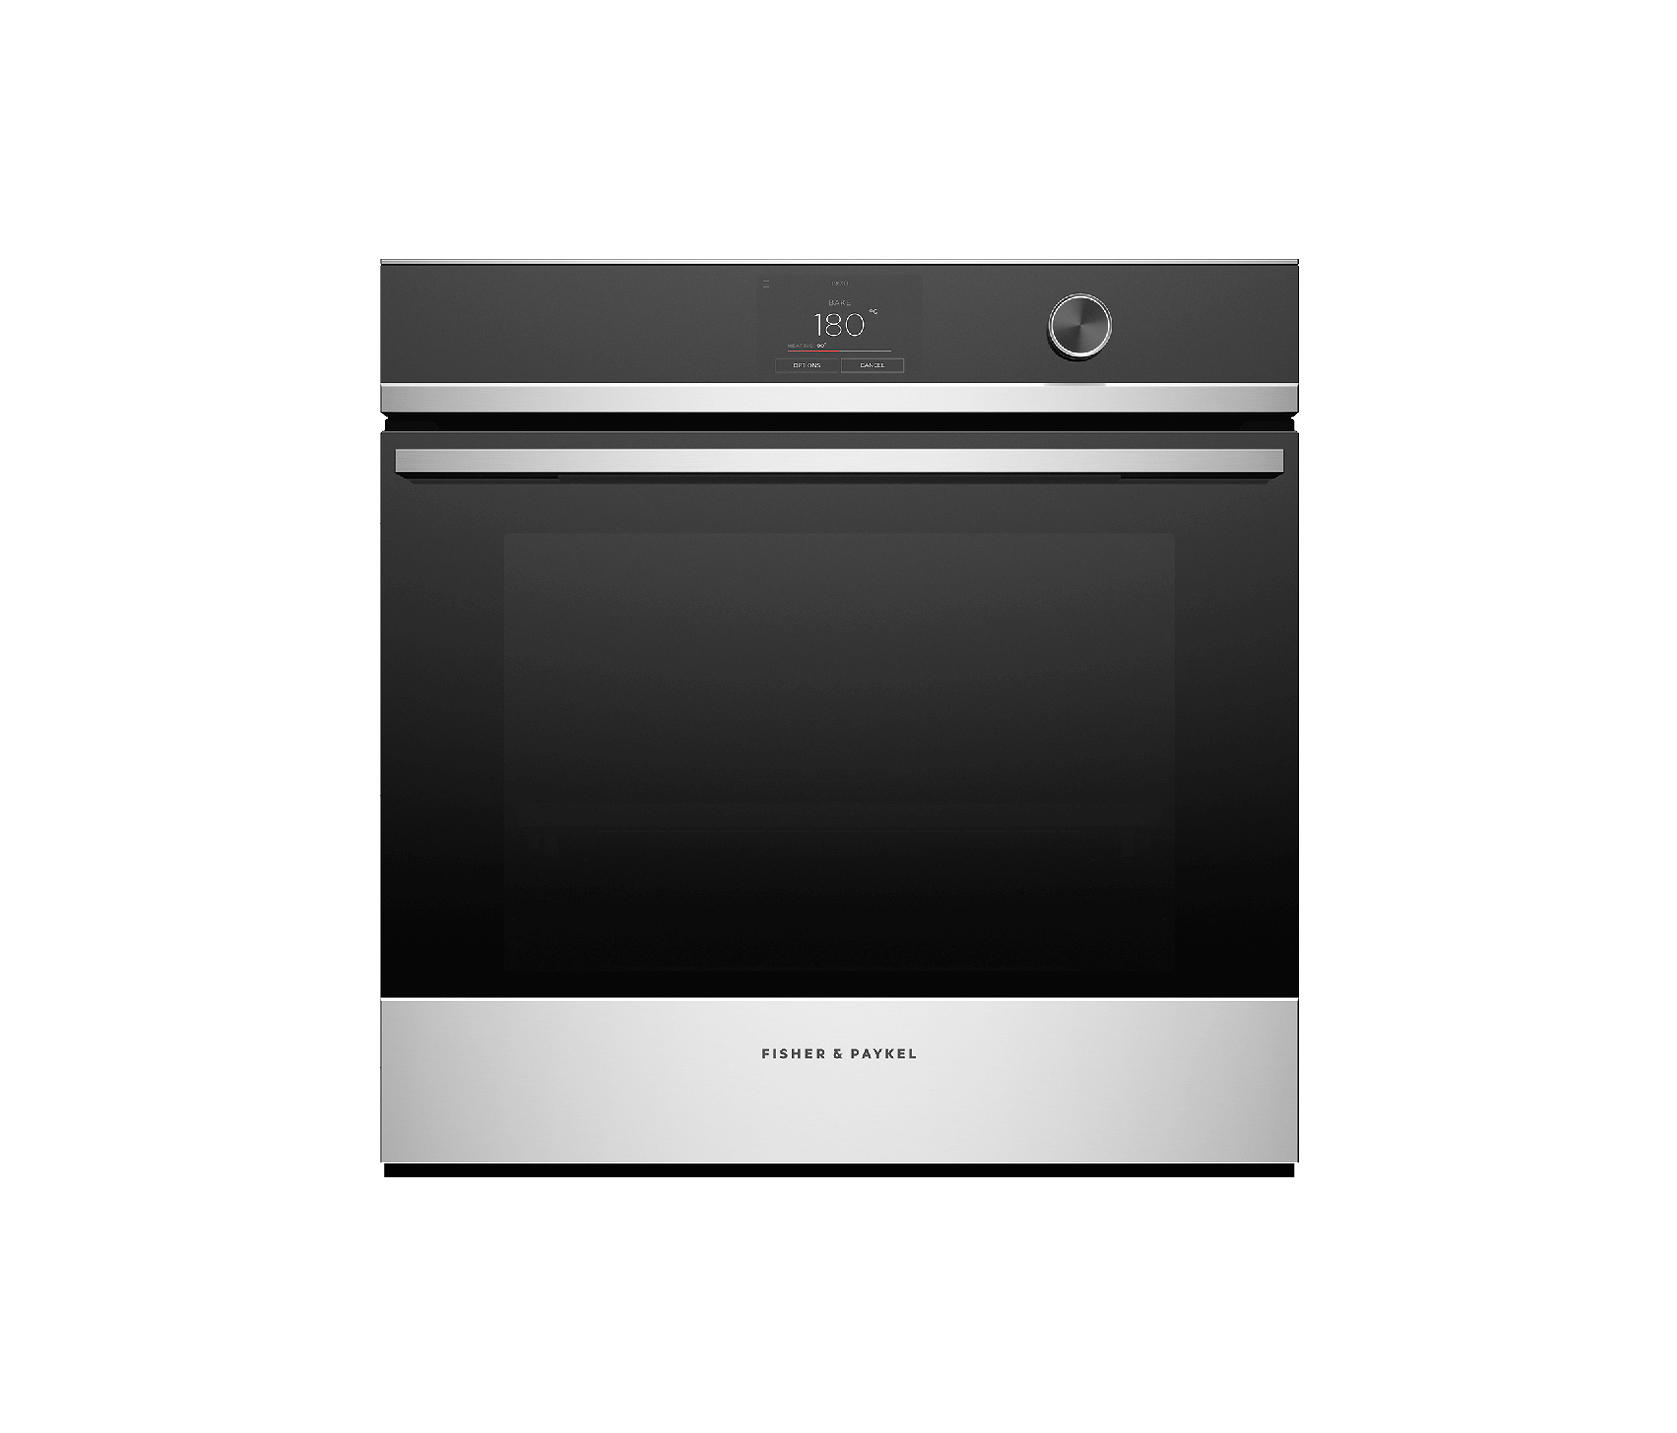 FISHER PAYKEL OB60SD11PB1 Self-Cleaning Oven